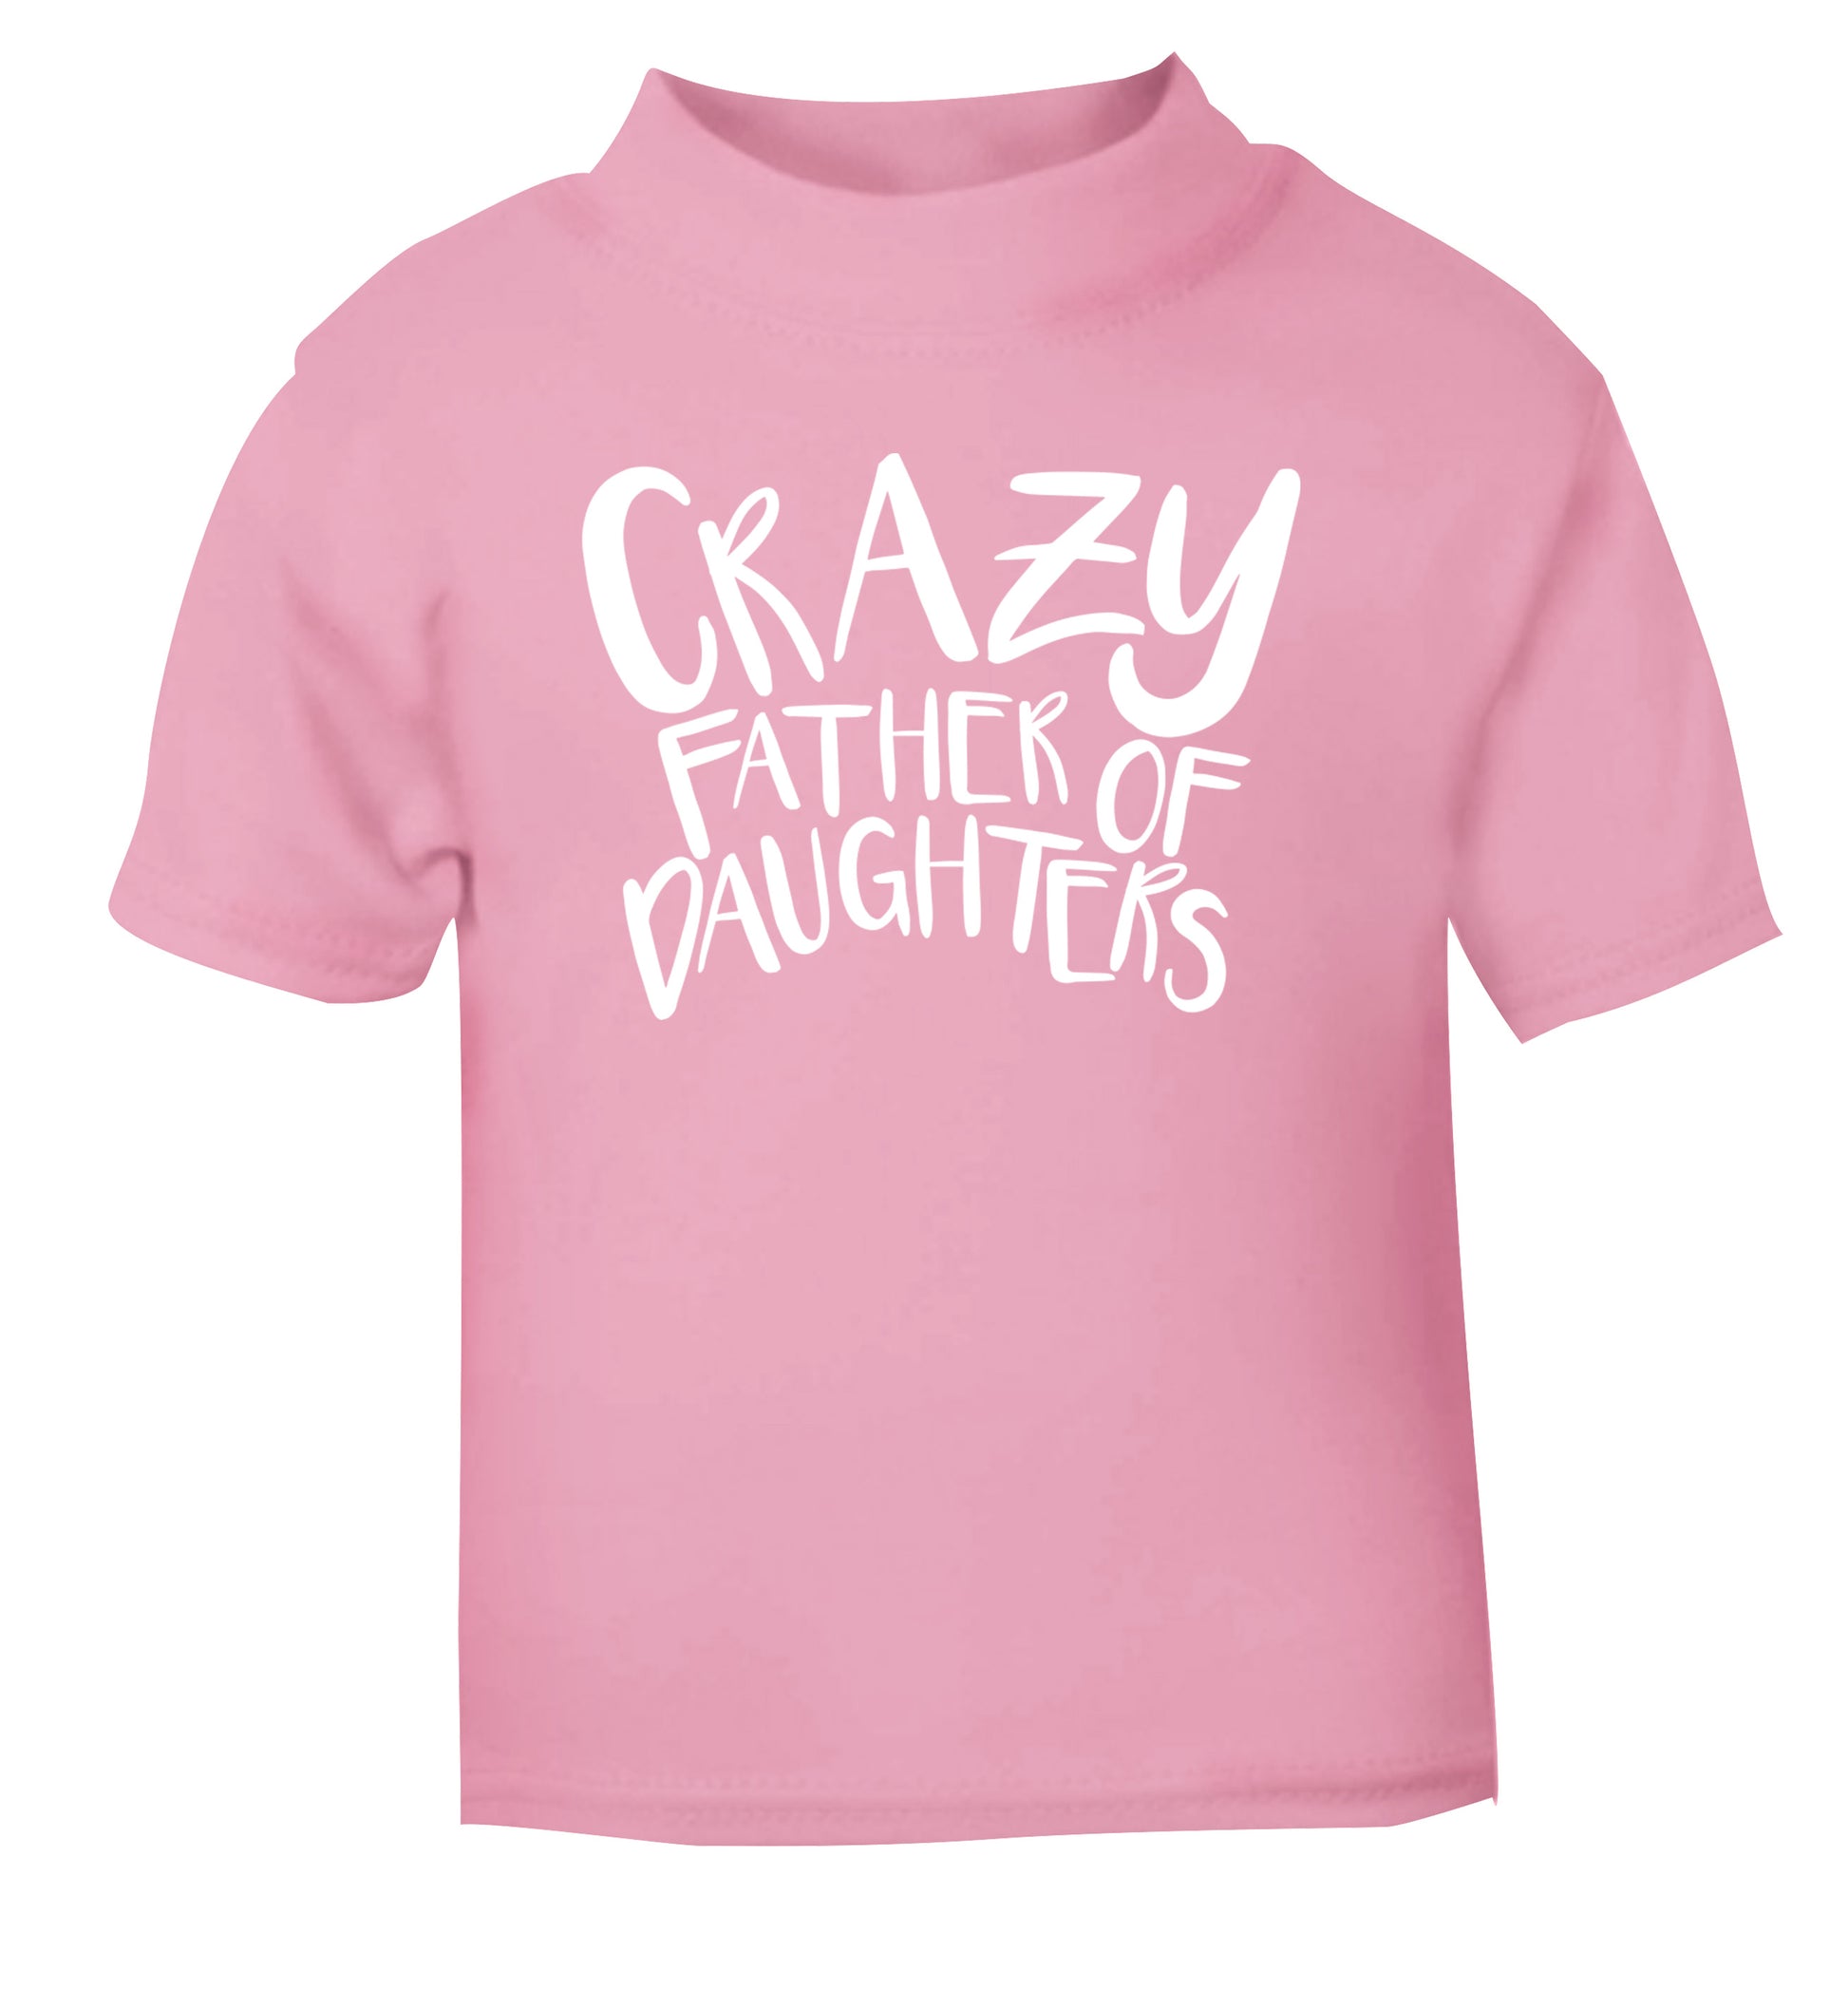 Crazy father of daughters light pink Baby Toddler Tshirt 2 Years